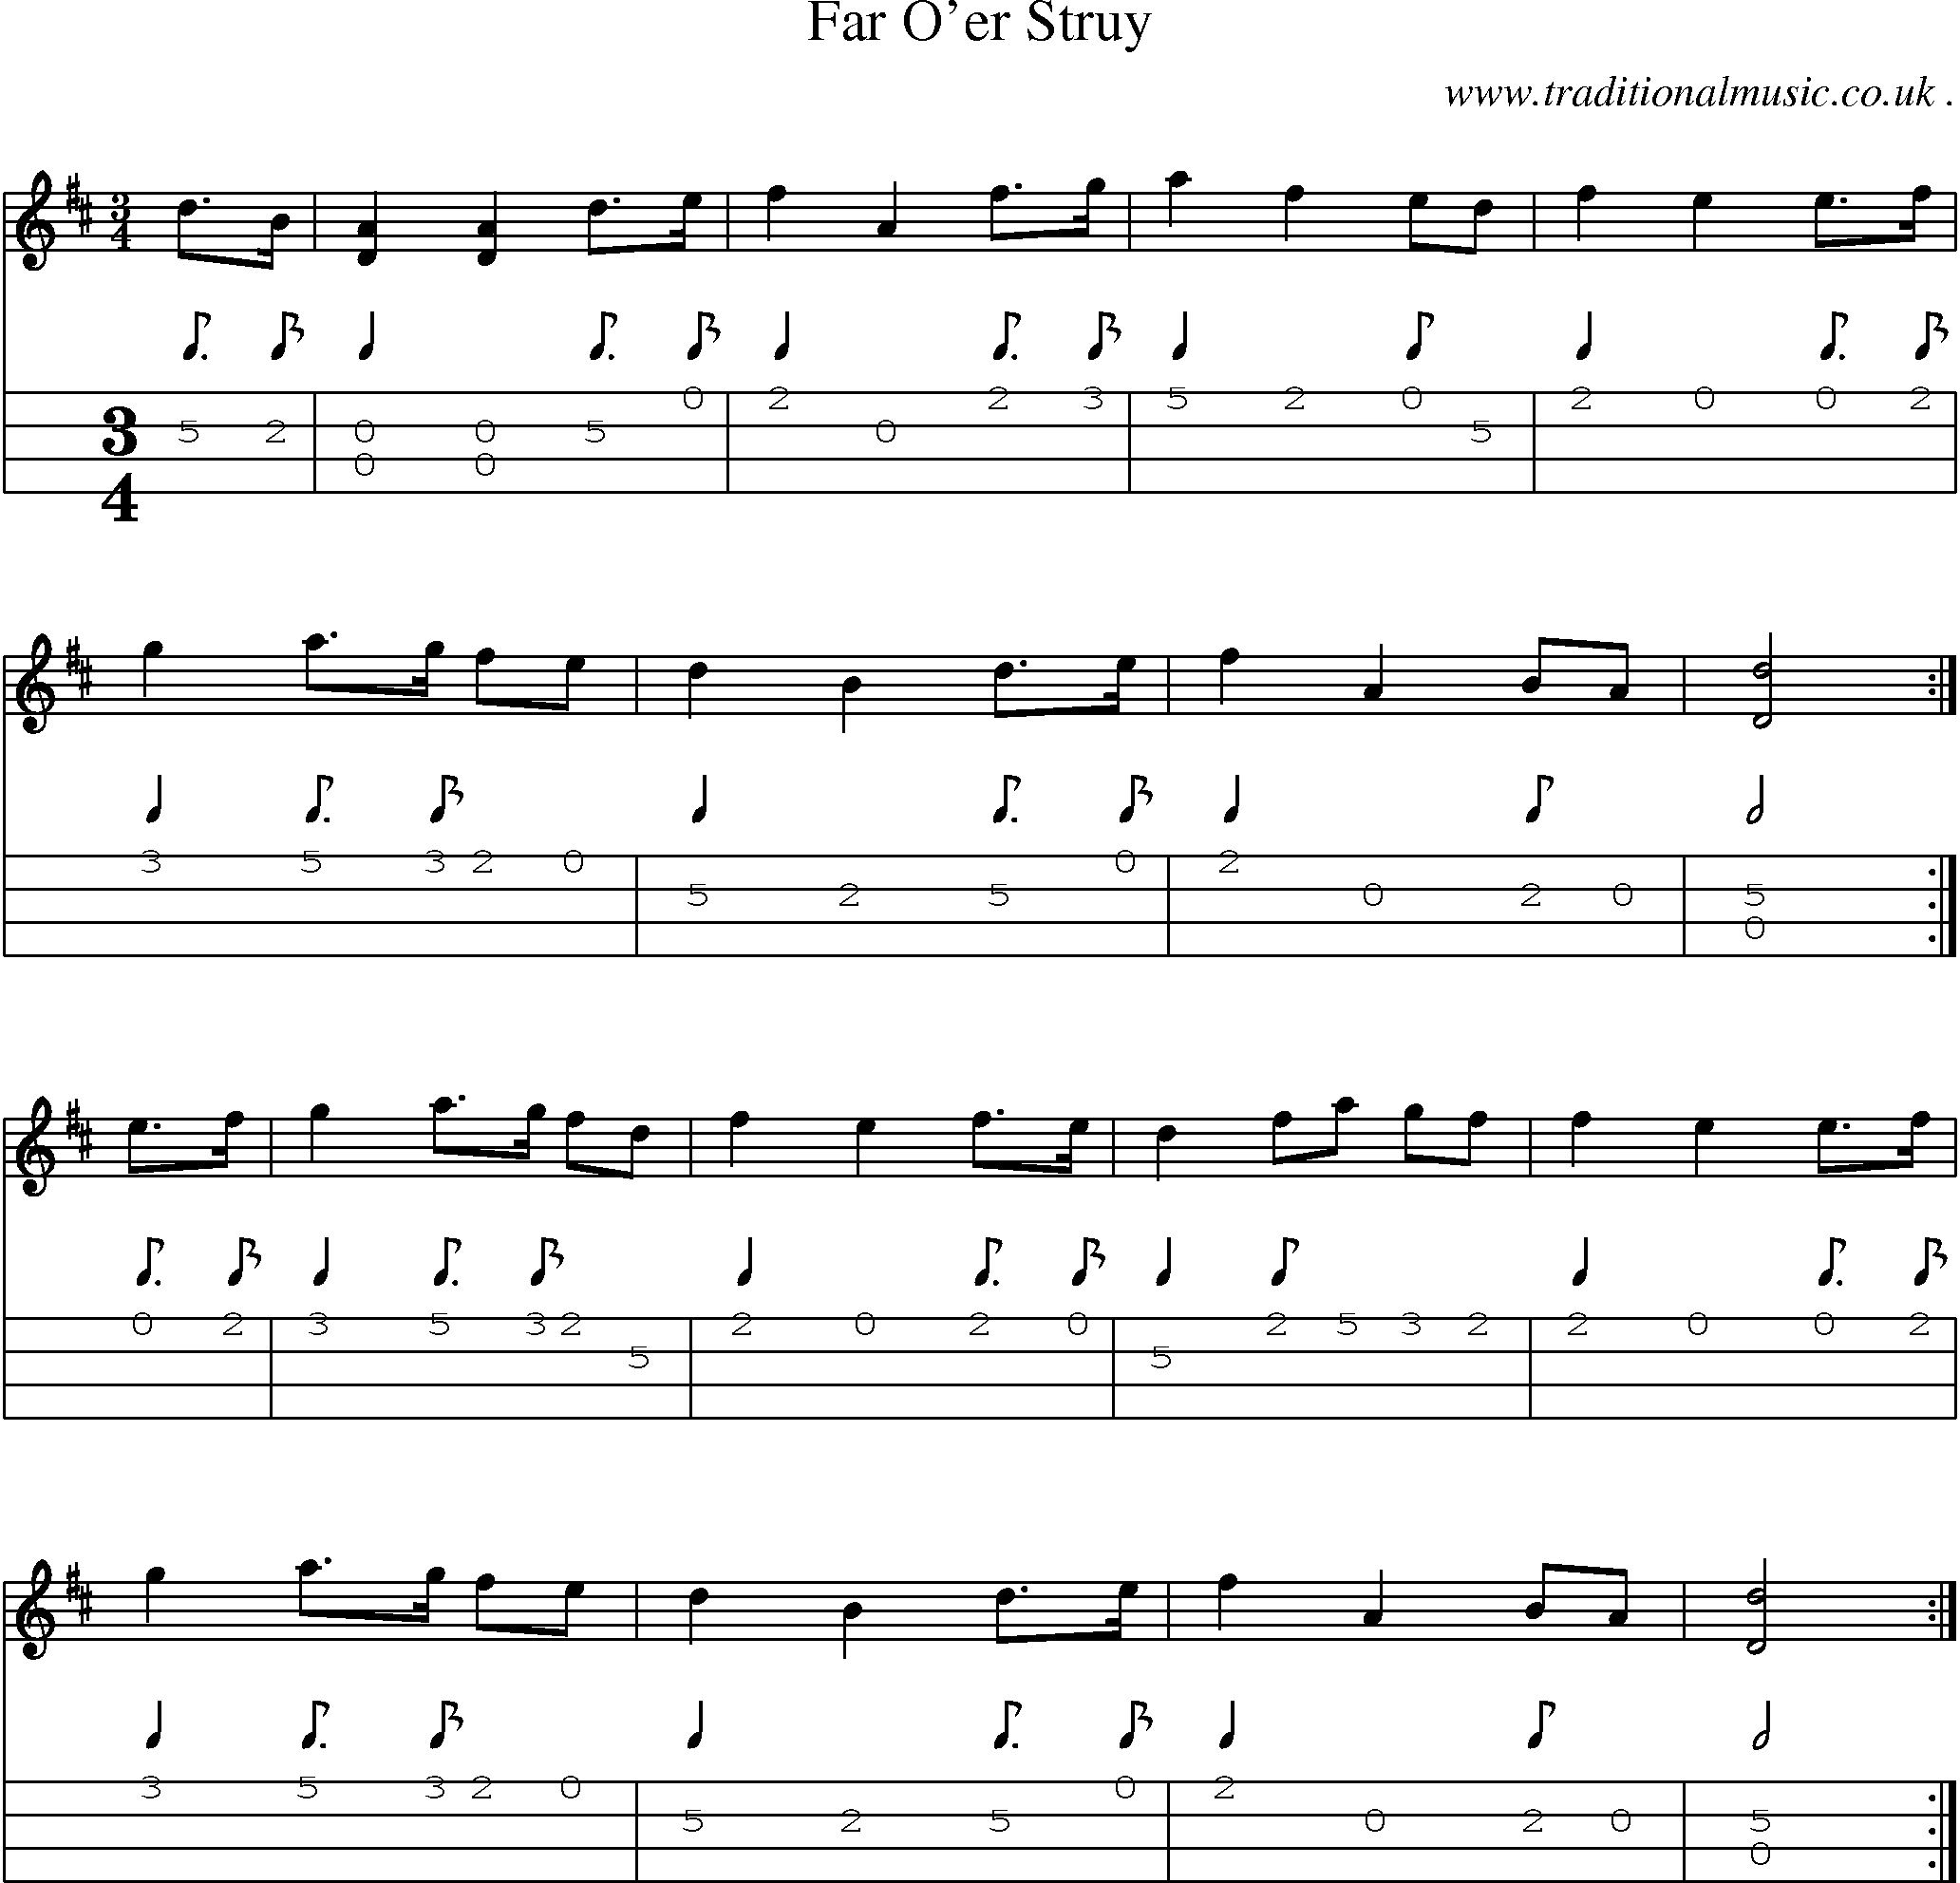 Sheet-music  score, Chords and Mandolin Tabs for Far Oer Struy